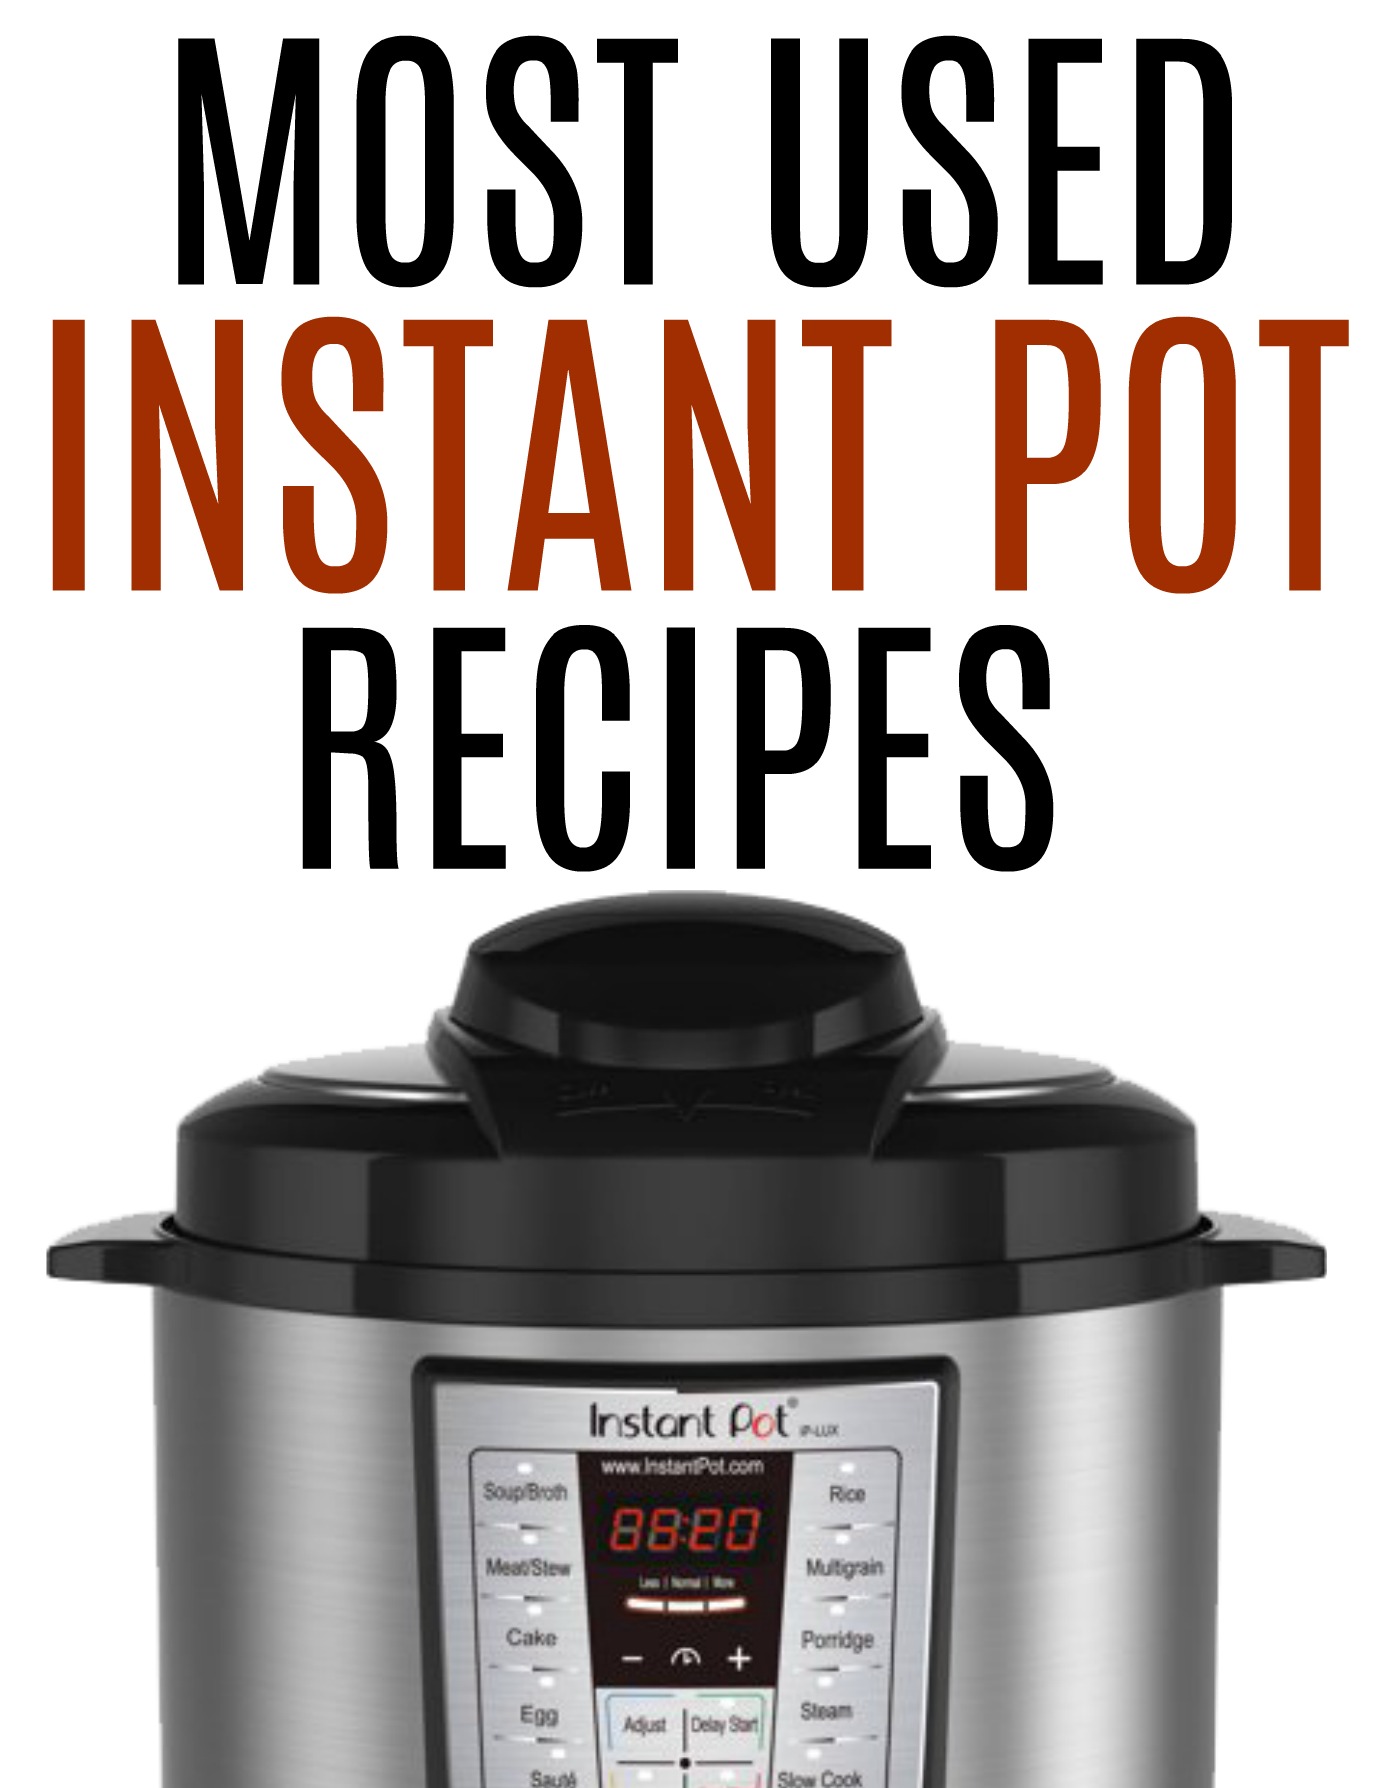 6 Things to Make in Your Instant Pot Every Week